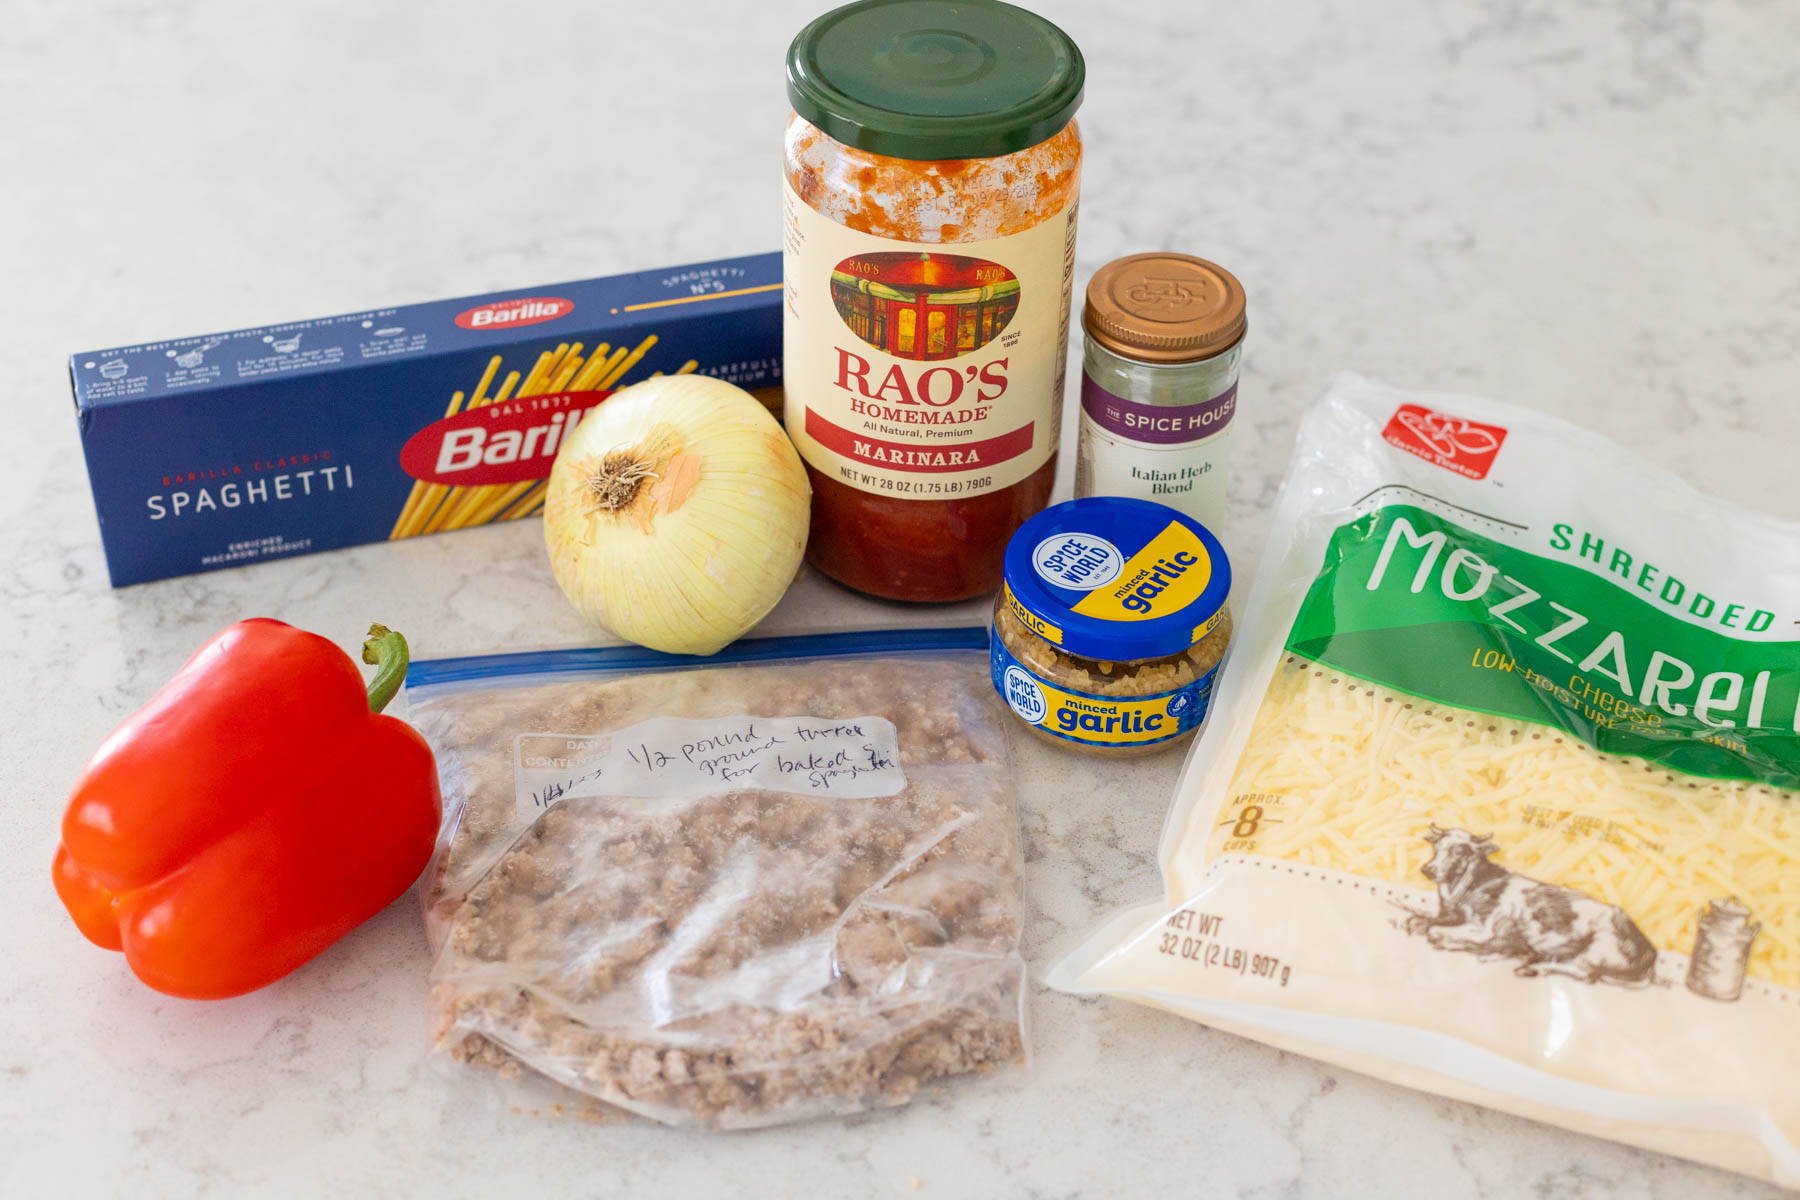 The ingredients to make the baked spaghetti casserole are on the counter.